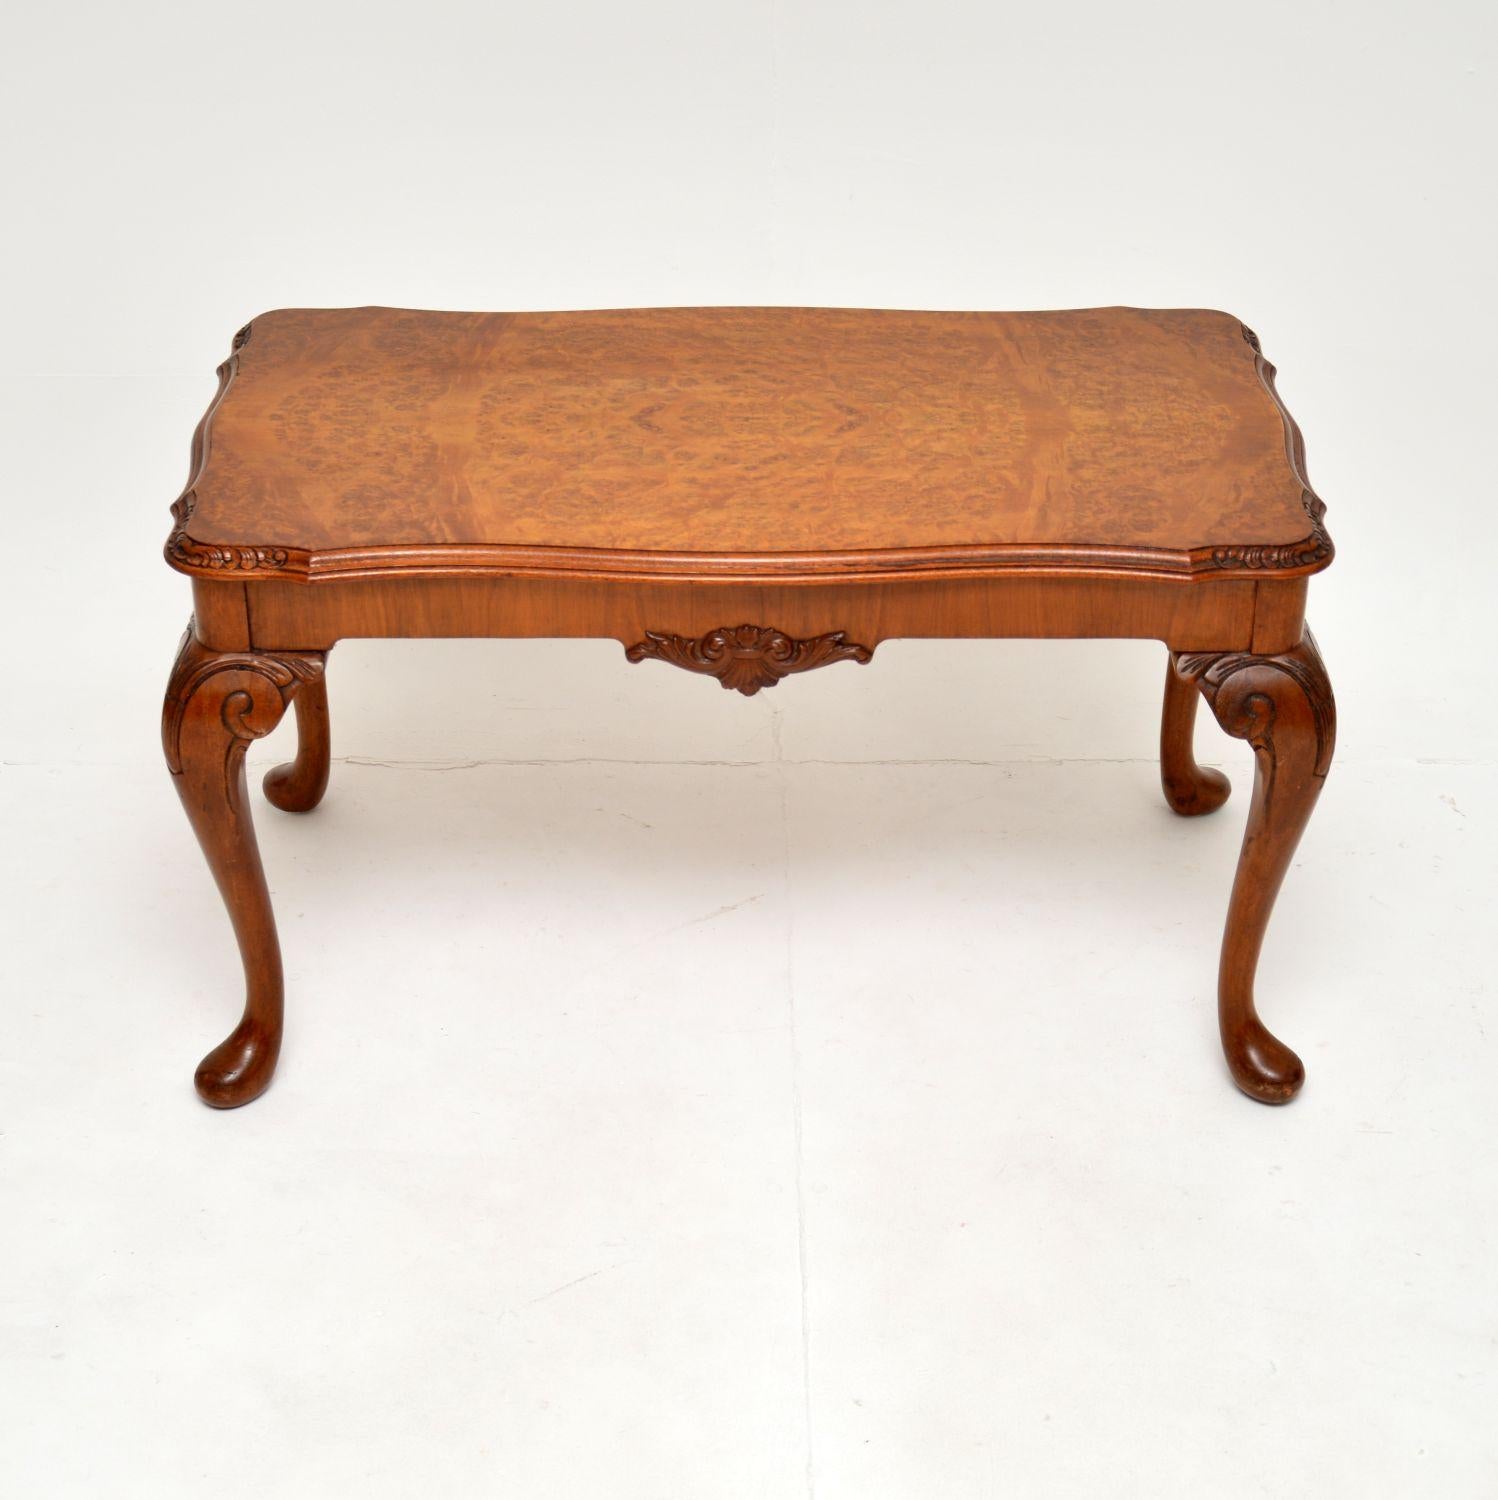 A lovely antique burr walnut coffee table in the Queen Anne style. This was made in England, it dates from around the 1930’s.

The quality is superb and this is a lovely, petite size. The edges are serpentine shaped and this sits on cabriole legs,